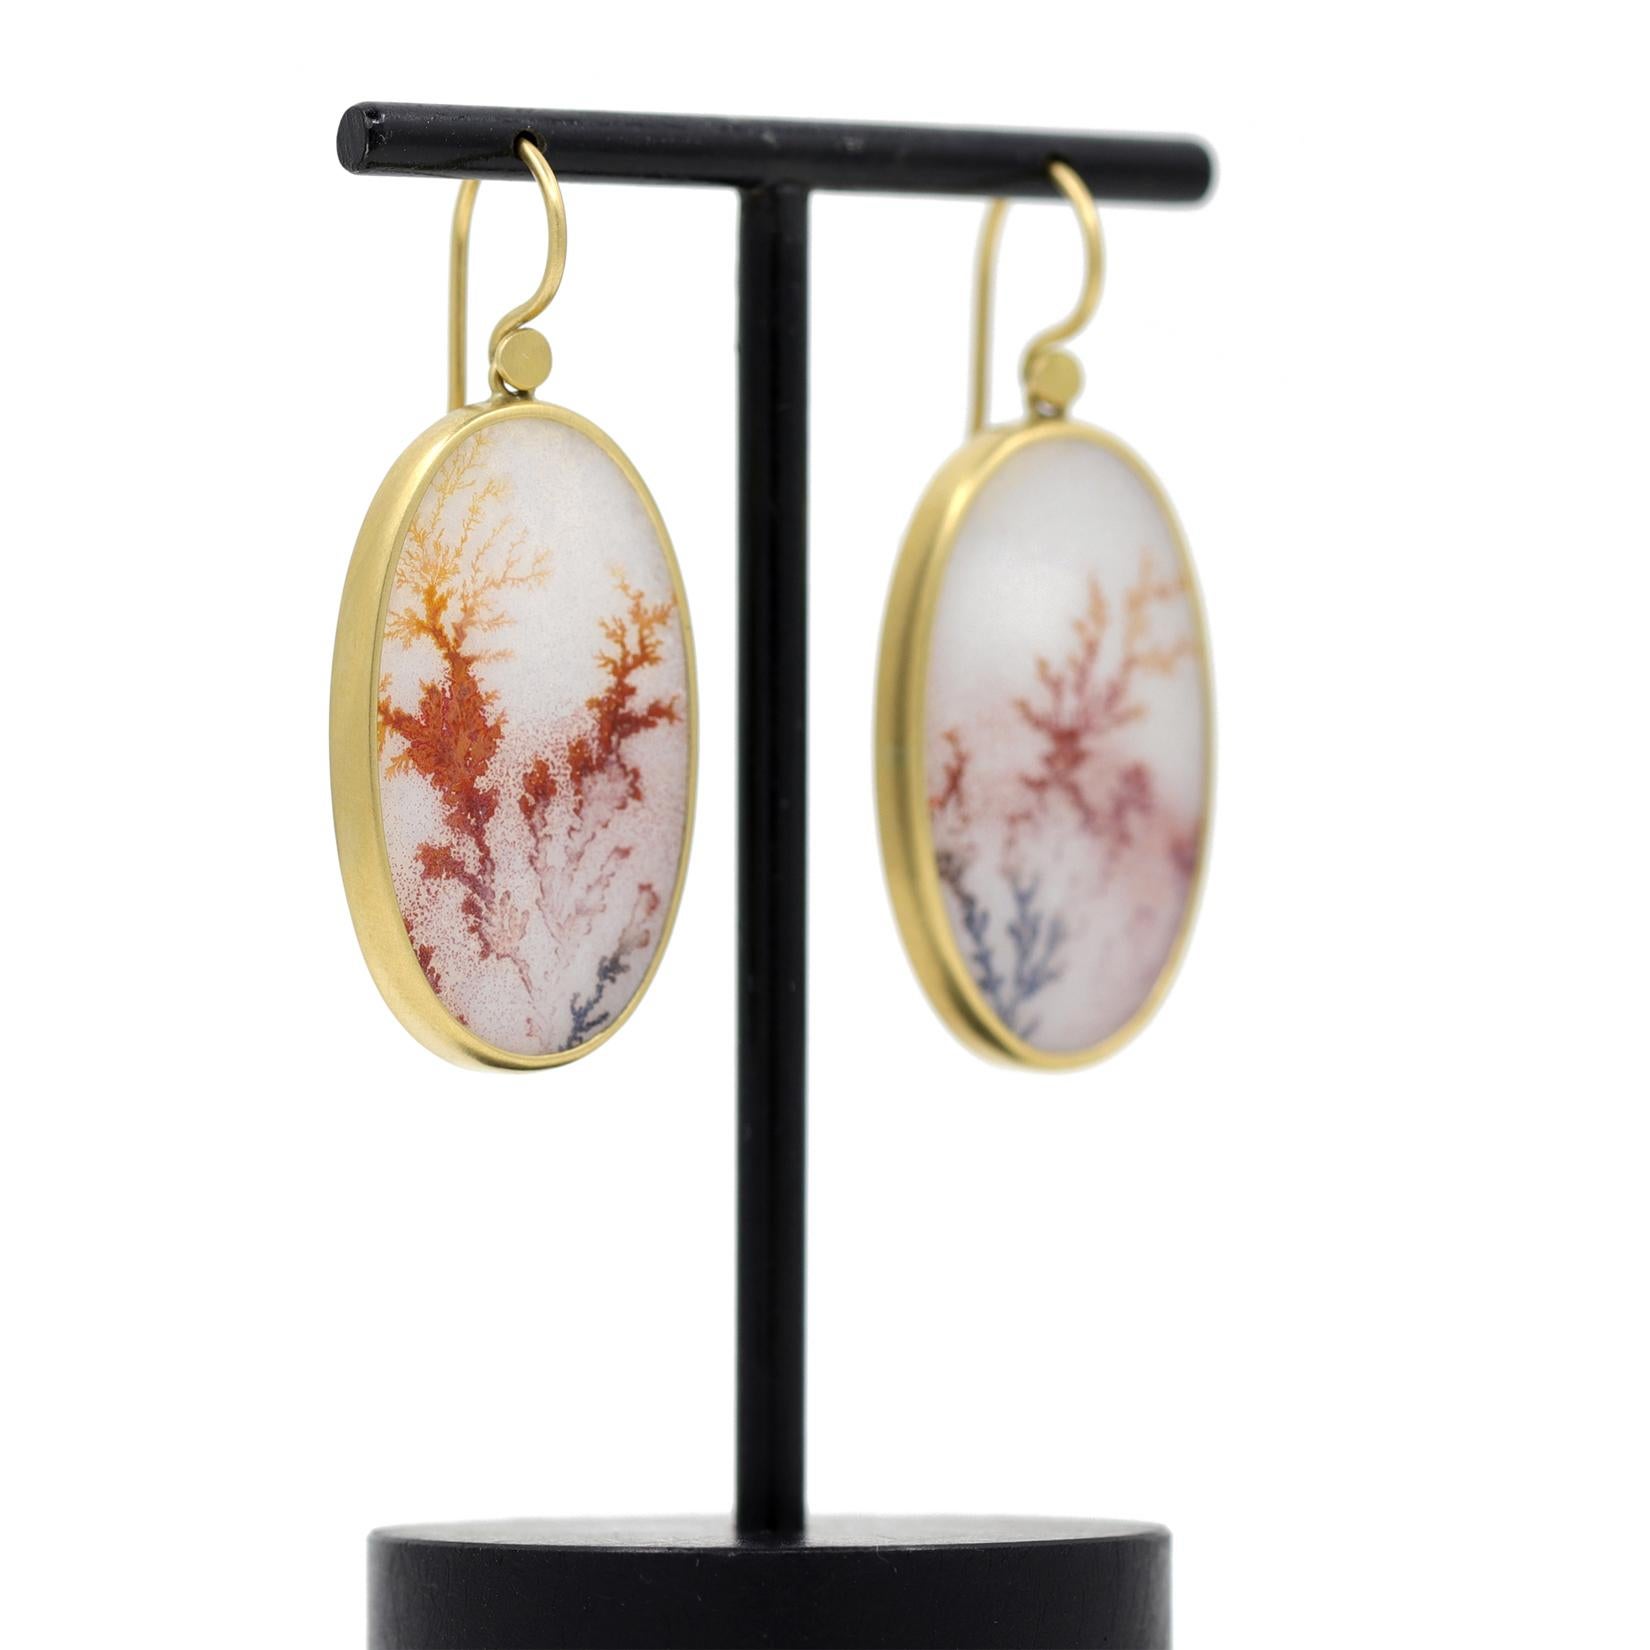 One of a Kind Drop Earrings hand-fabricated by jewelry maker Lola Brooks in signature-finished 18k yellow gold showcasing a large, beautifully matched pair of natural dendritic agate ovals, each bezel-set and finished with Lola's signature accented